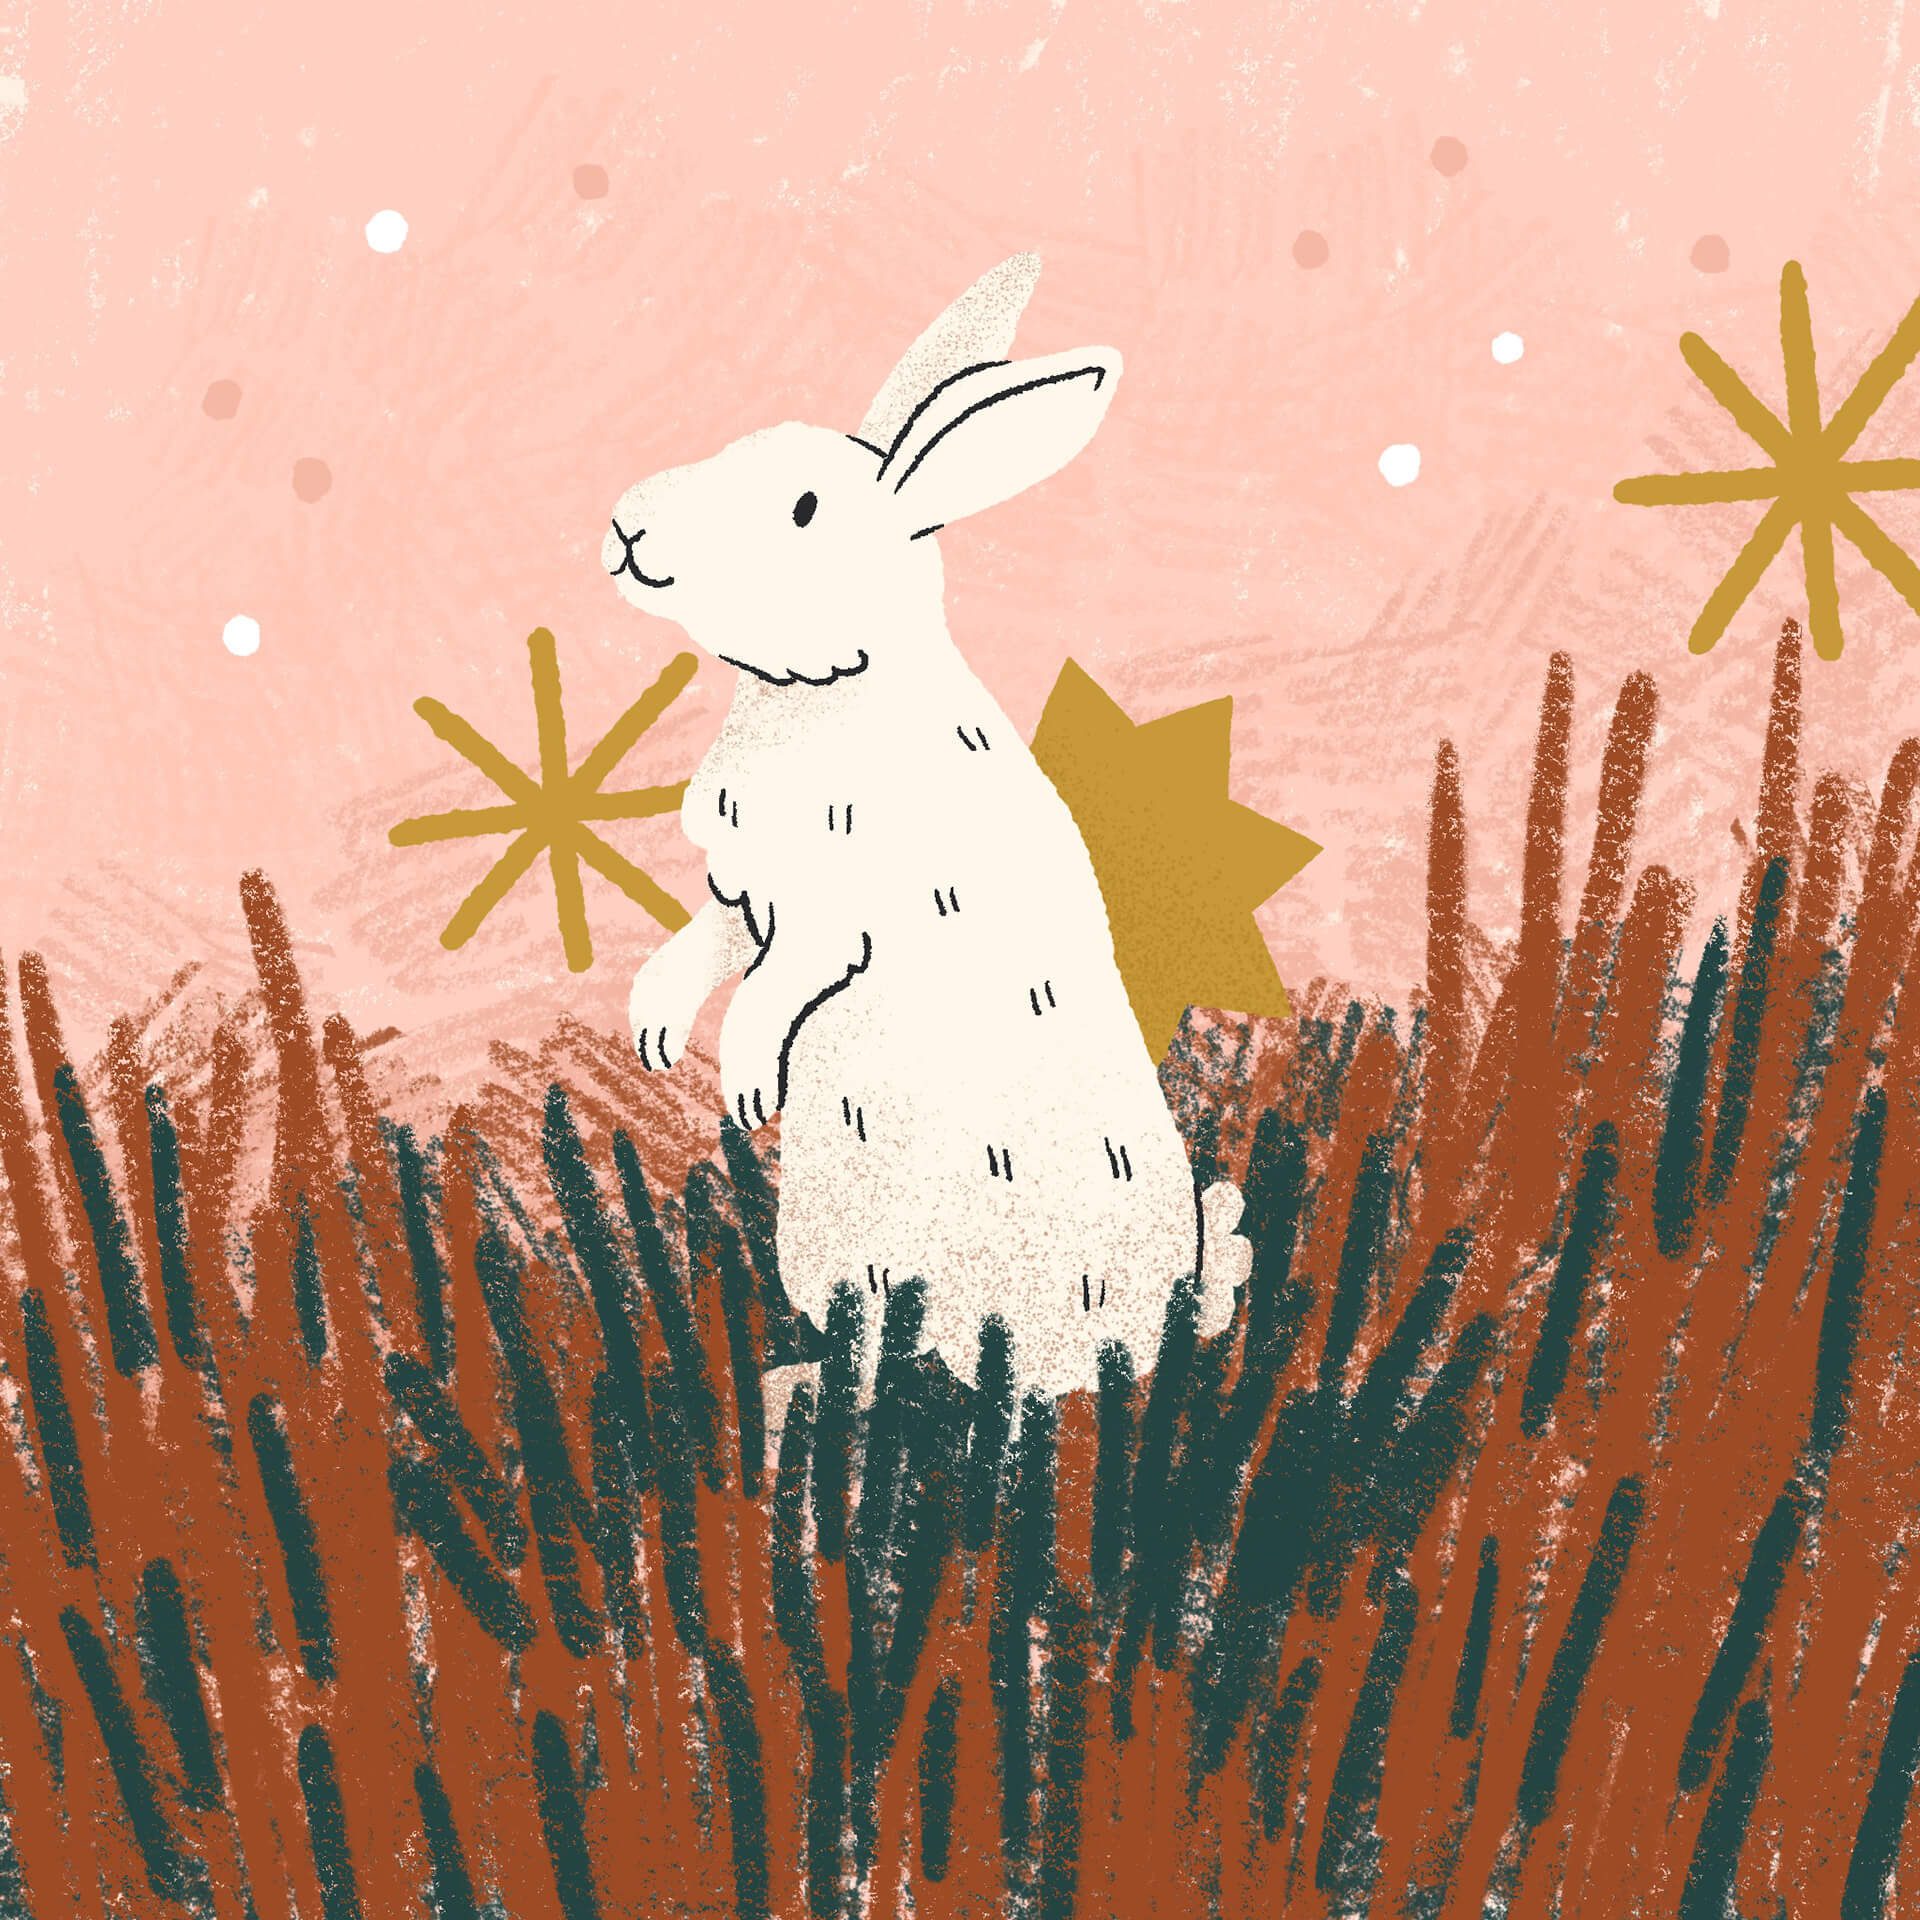 An illustration of a white rabbit standing up and looking around. It is surrounded by orange and green grass with a pink background